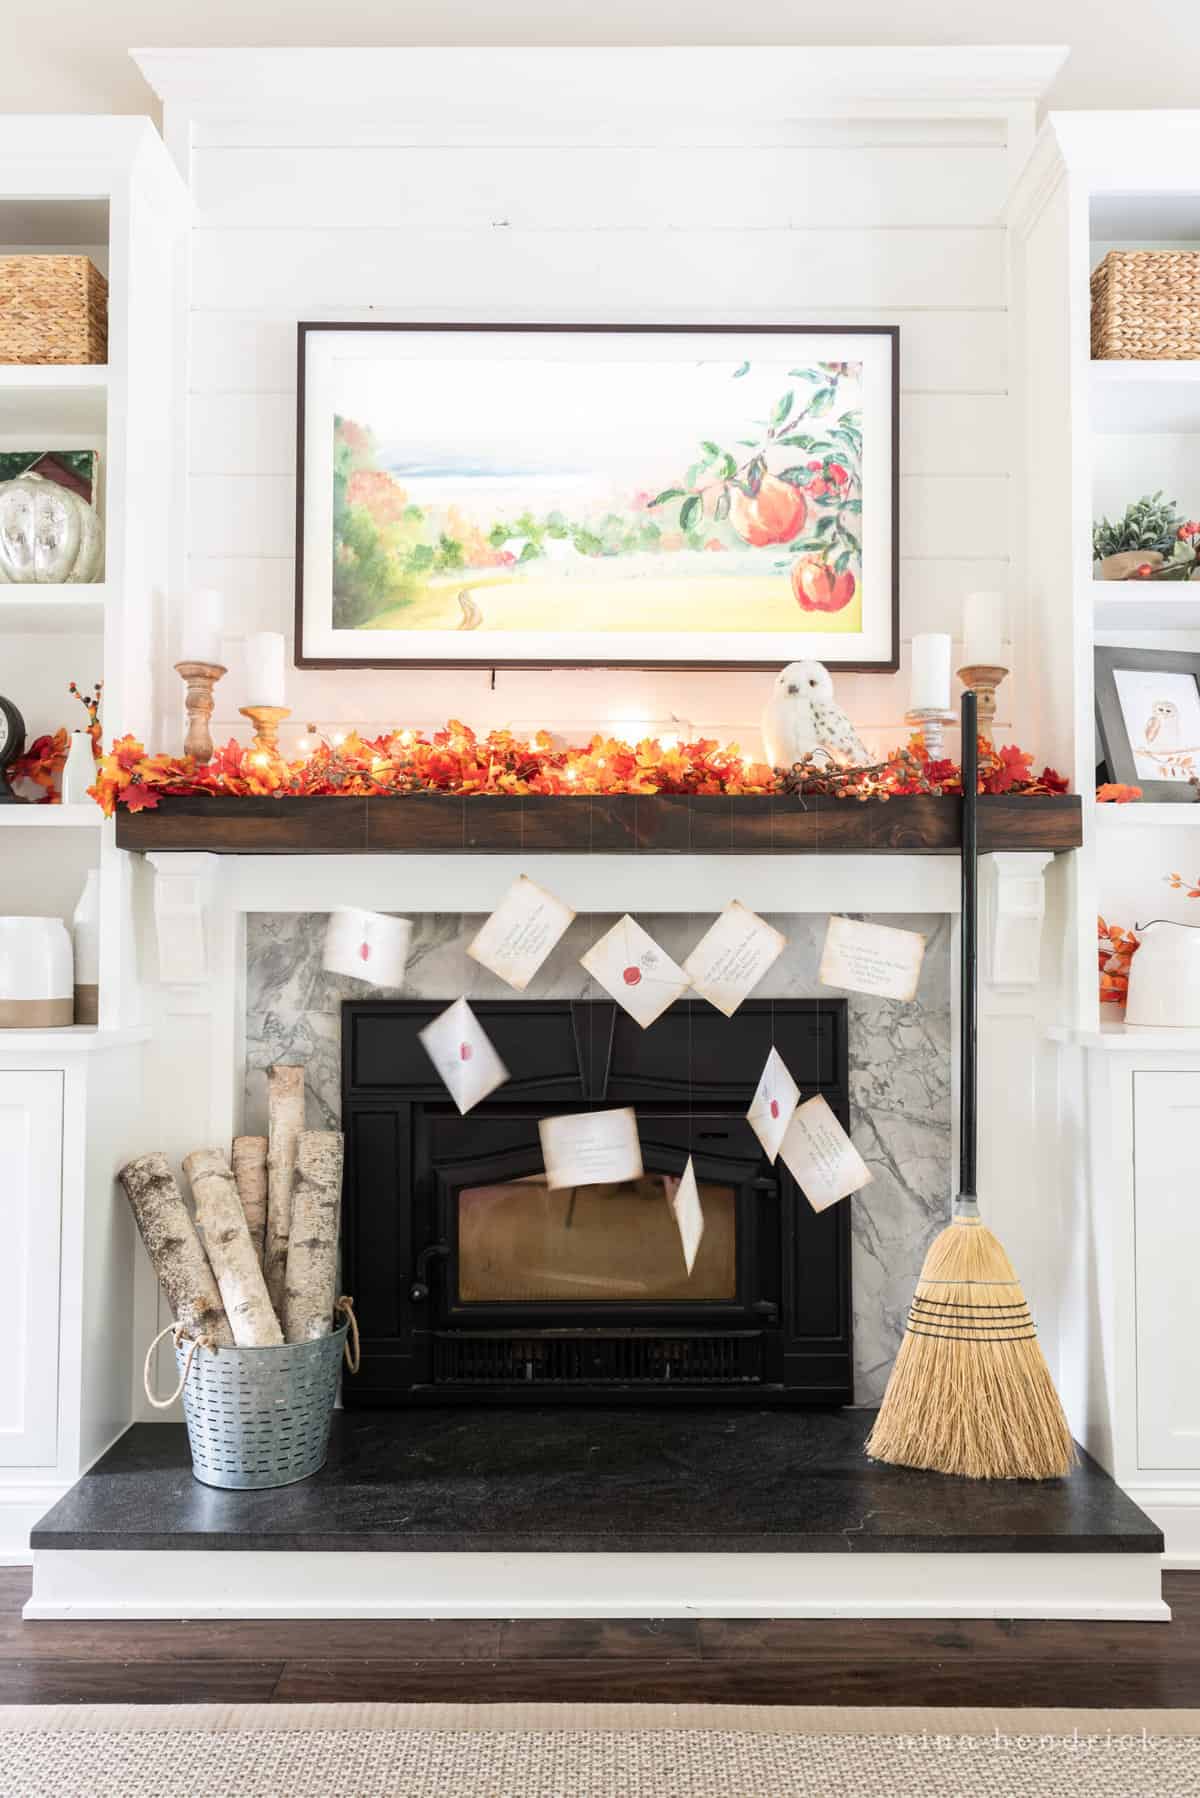 A fireplace mantle decorated with fall leaves and a broom, featuring a Hogwarts acceptance letter.